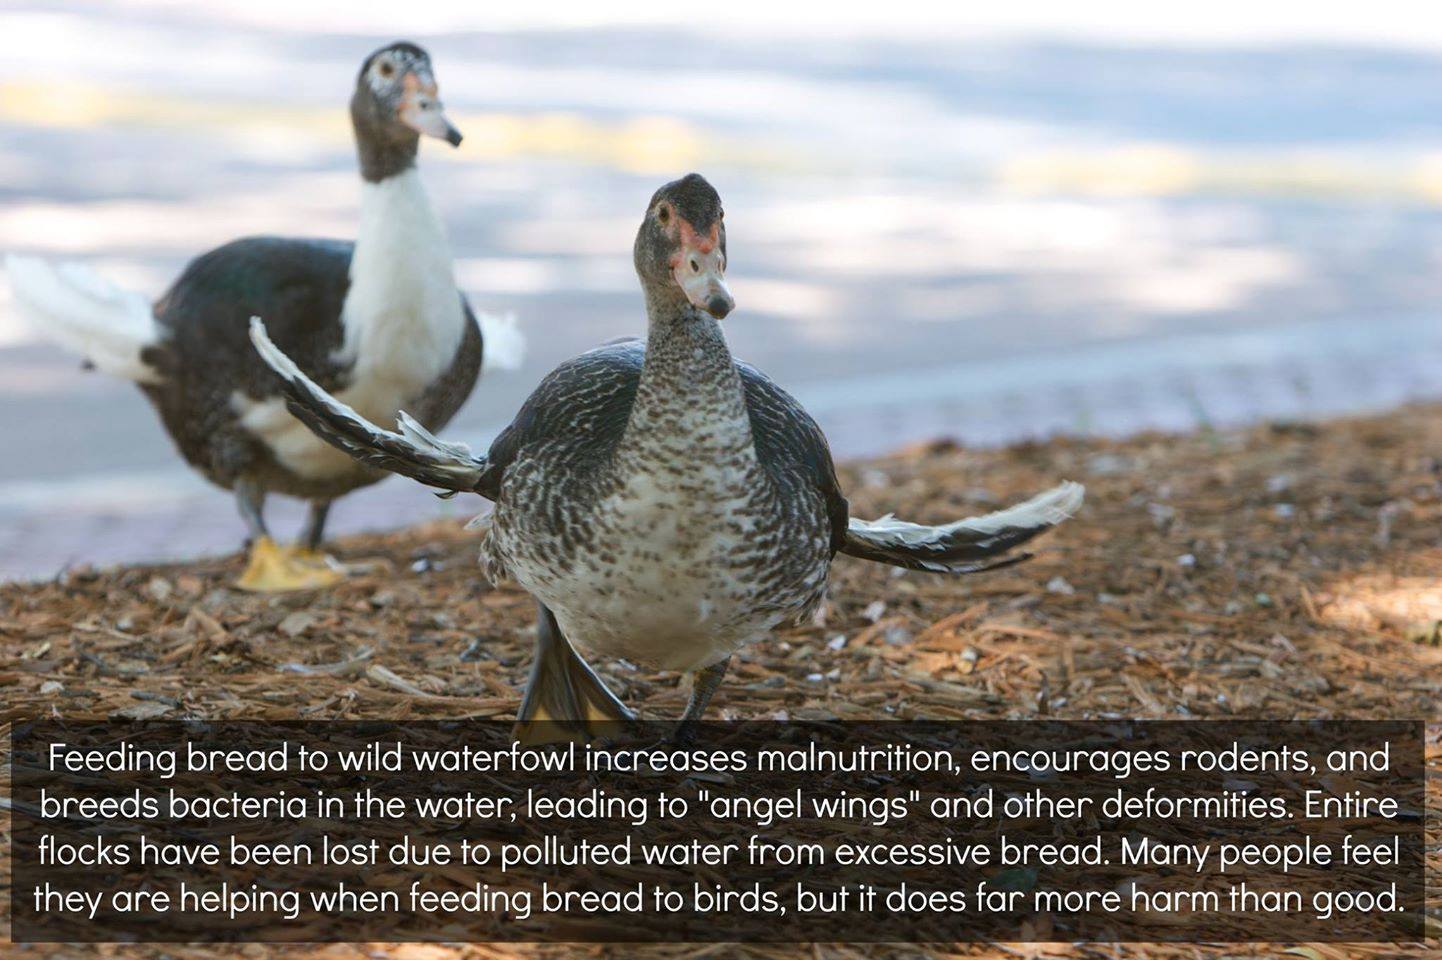 feeding birds bread - Feeding bread to wild waterfowl increases malnutrition, encourages rodents, and breeds bacteria in the water, leading to "angel wings" and other deformities. Entire flocks have been lost due to polluted water from excessive bread. Ma